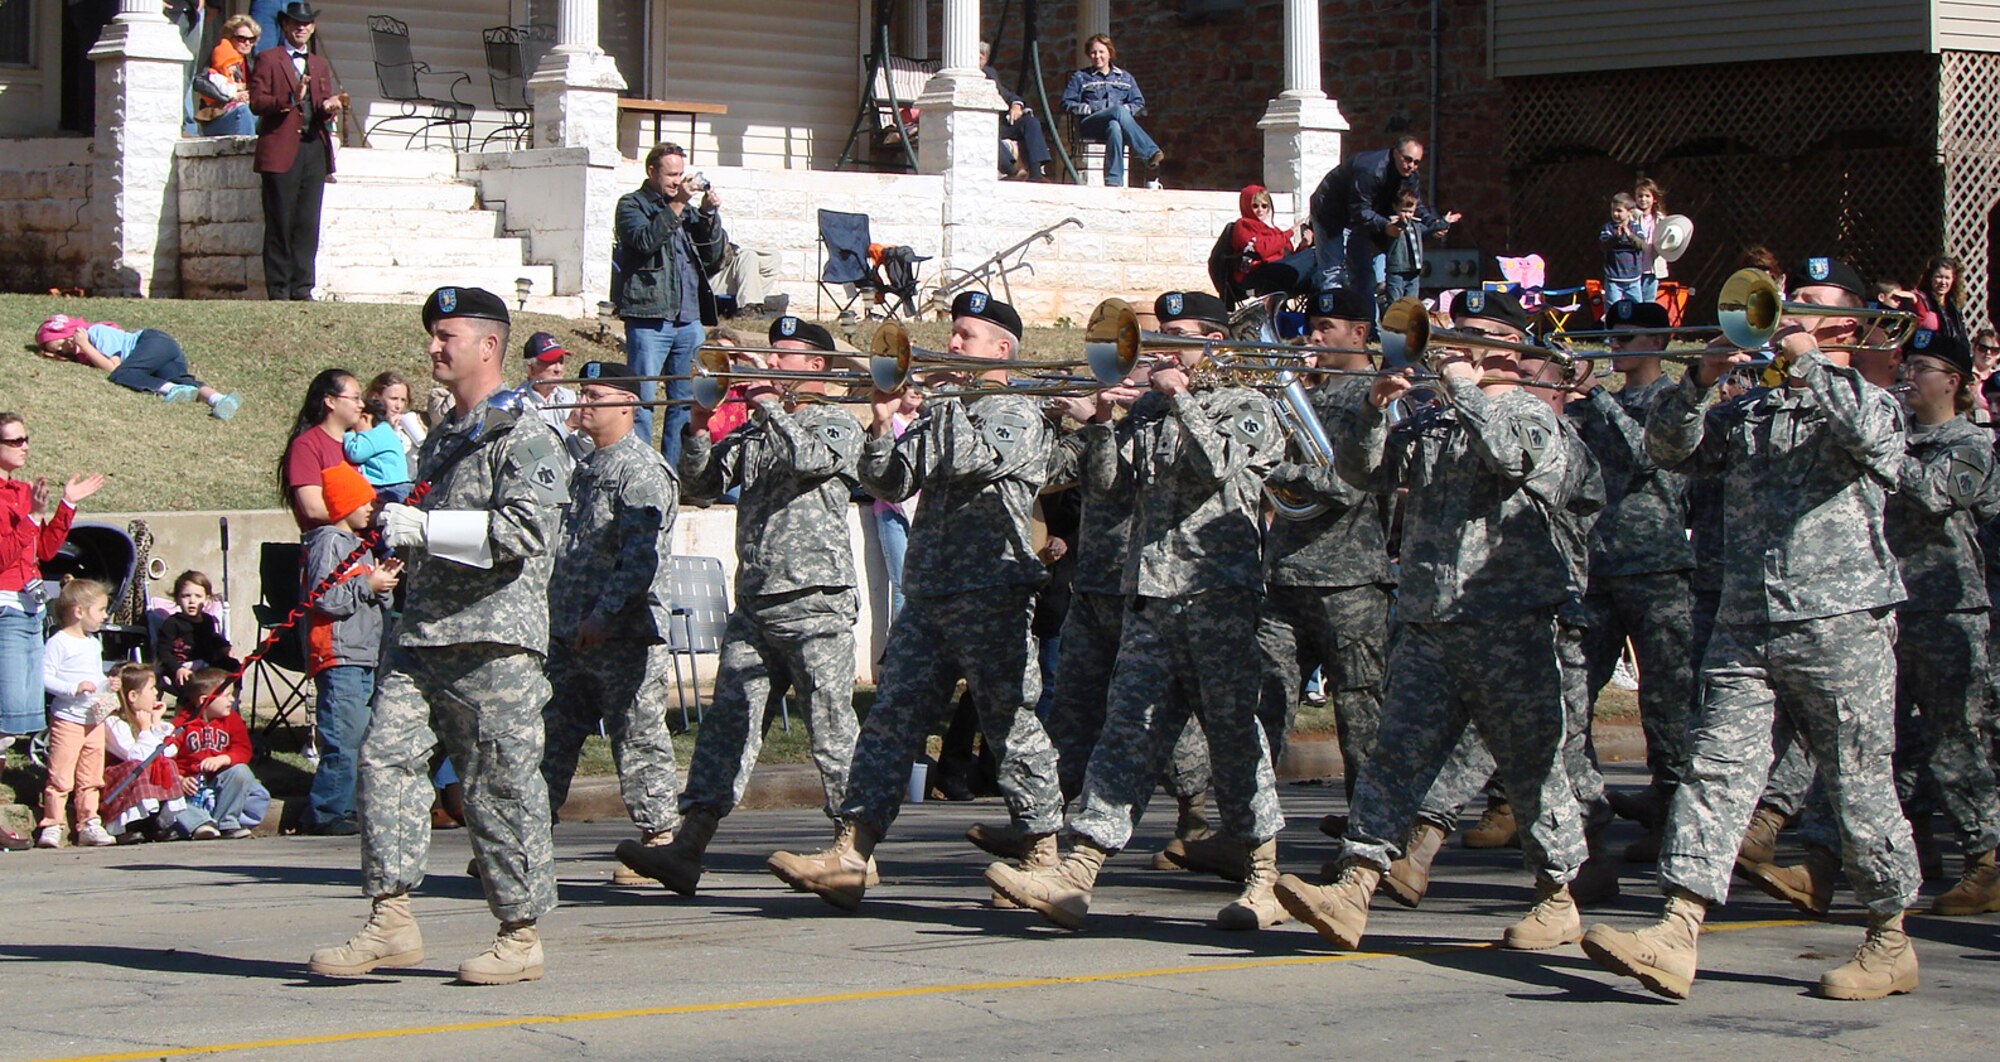 The 145th Army Band from Oklahoma City marches to own their tune during the Oklahoma Centennial parade Nov. 16 at Guthrie, Okla. The band followed the Vance Air Force Base T-38C flyover that kicked off the parade. (U.S. Air Force photo by Tech. Sgt. Mary Davis)